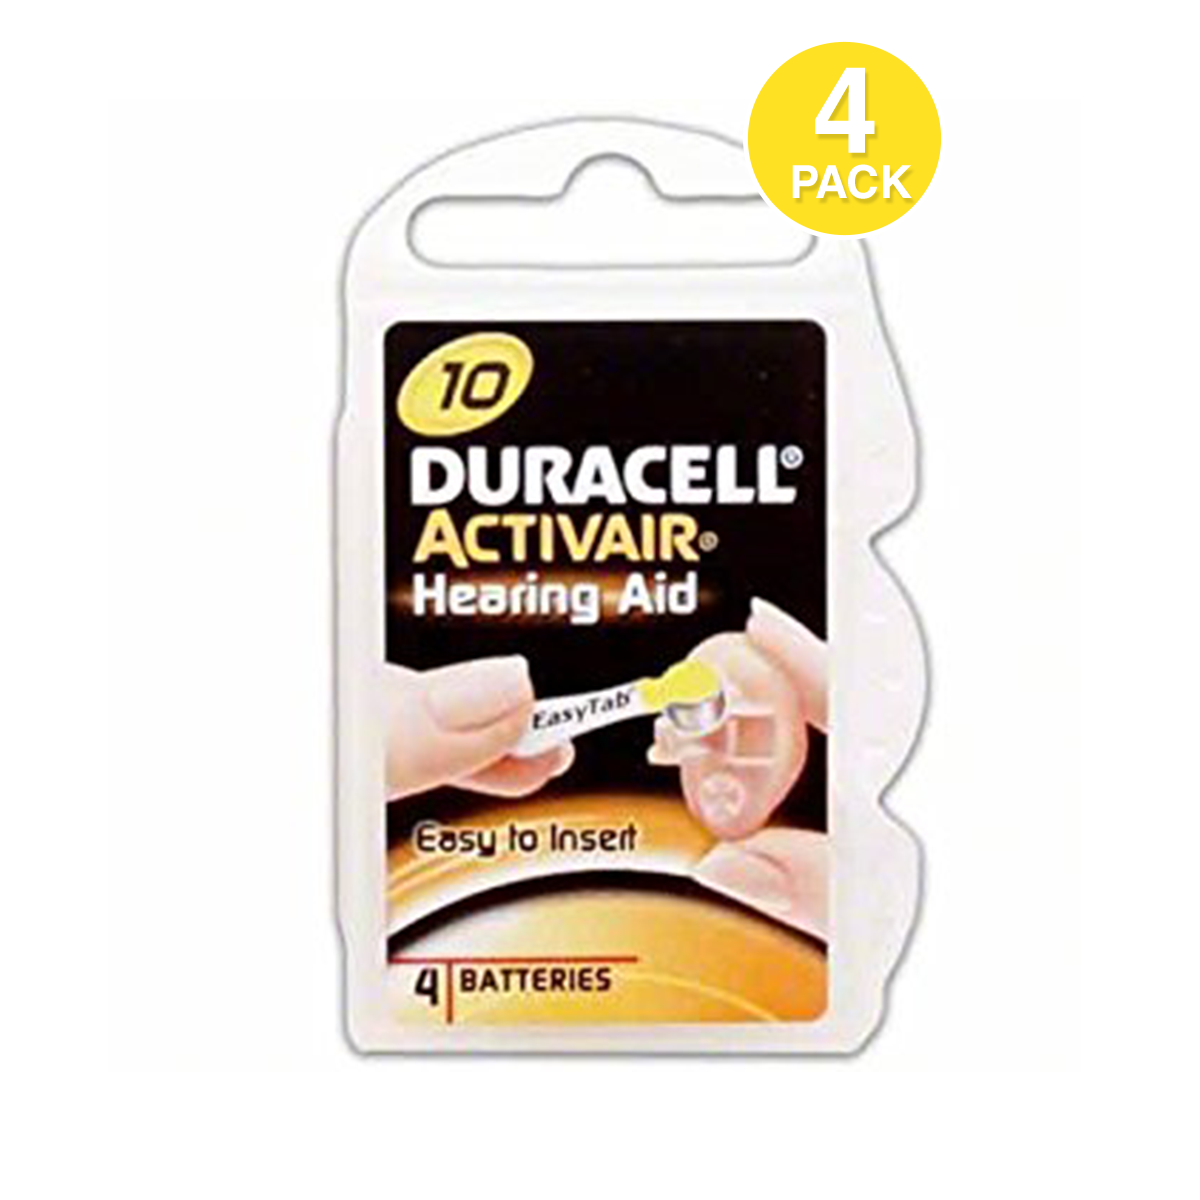 Duracell Activair Size 10 Hearing Aid Battery,  (4 PCS)